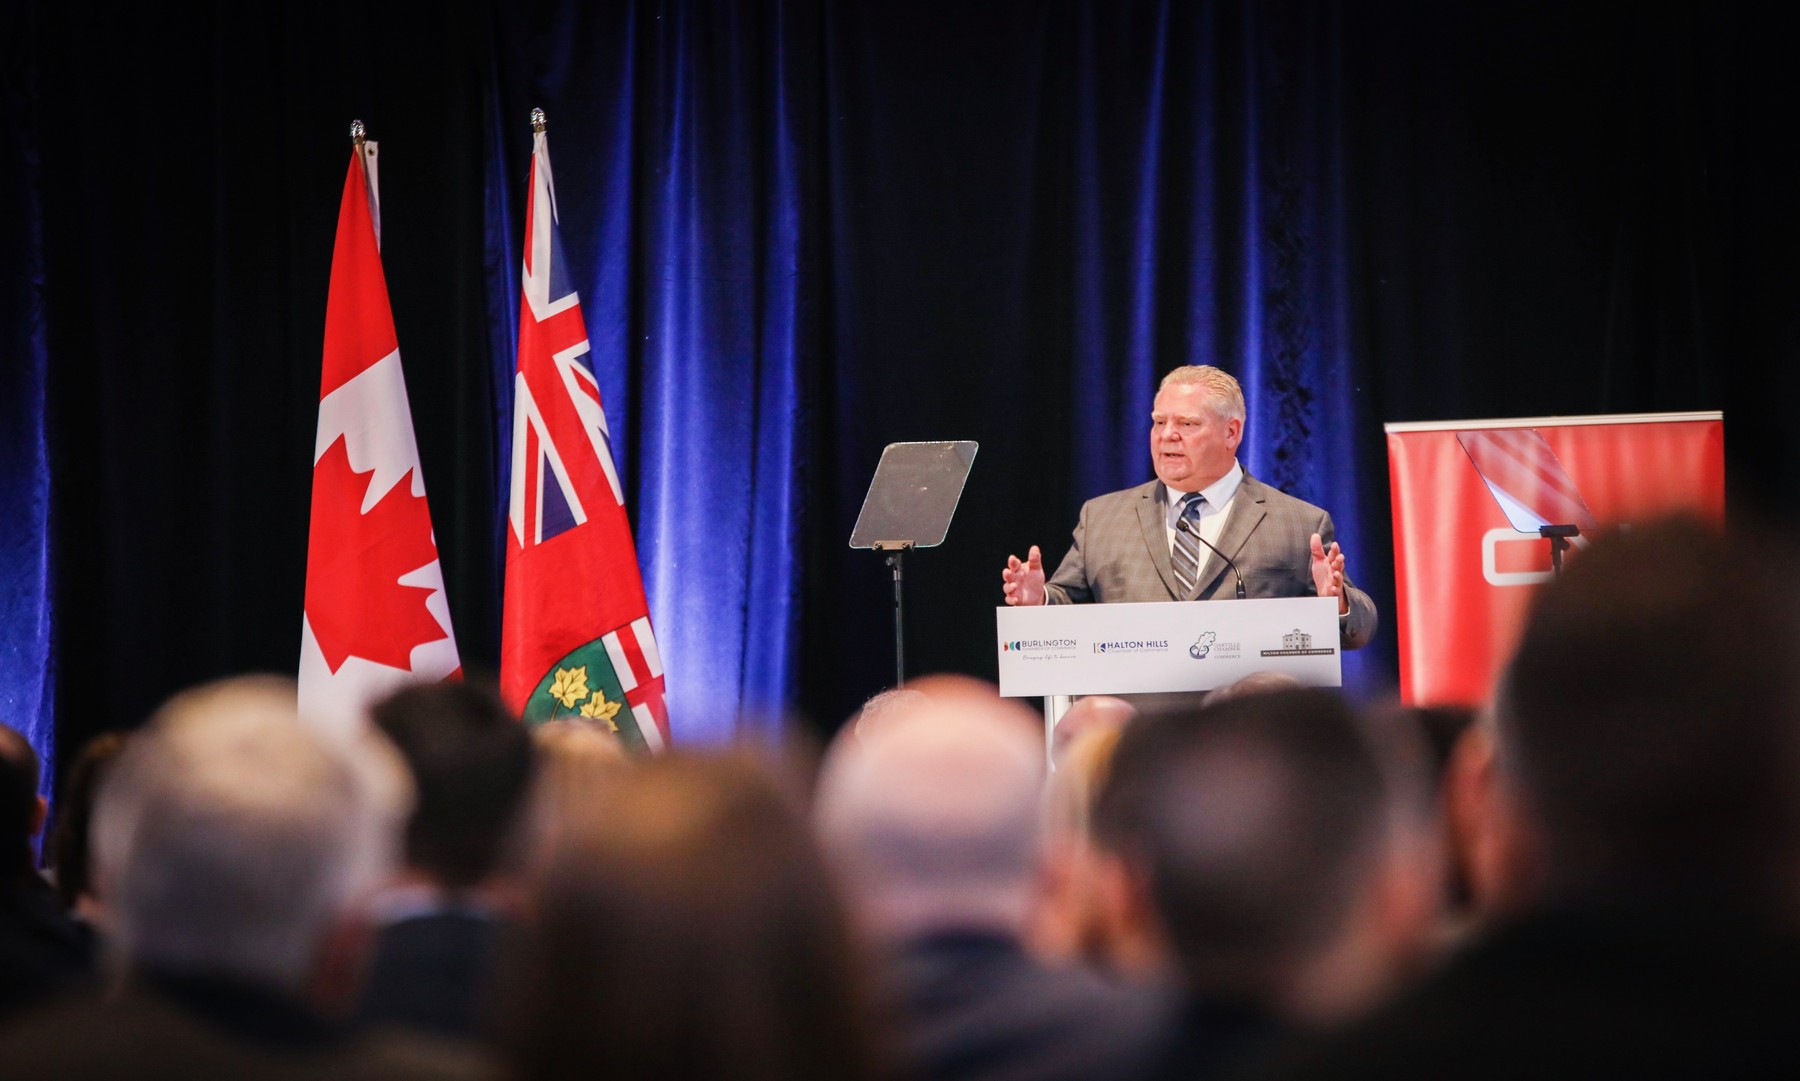 Ontario Premier Ford speaking at an event in 2019 | Government of Ontario